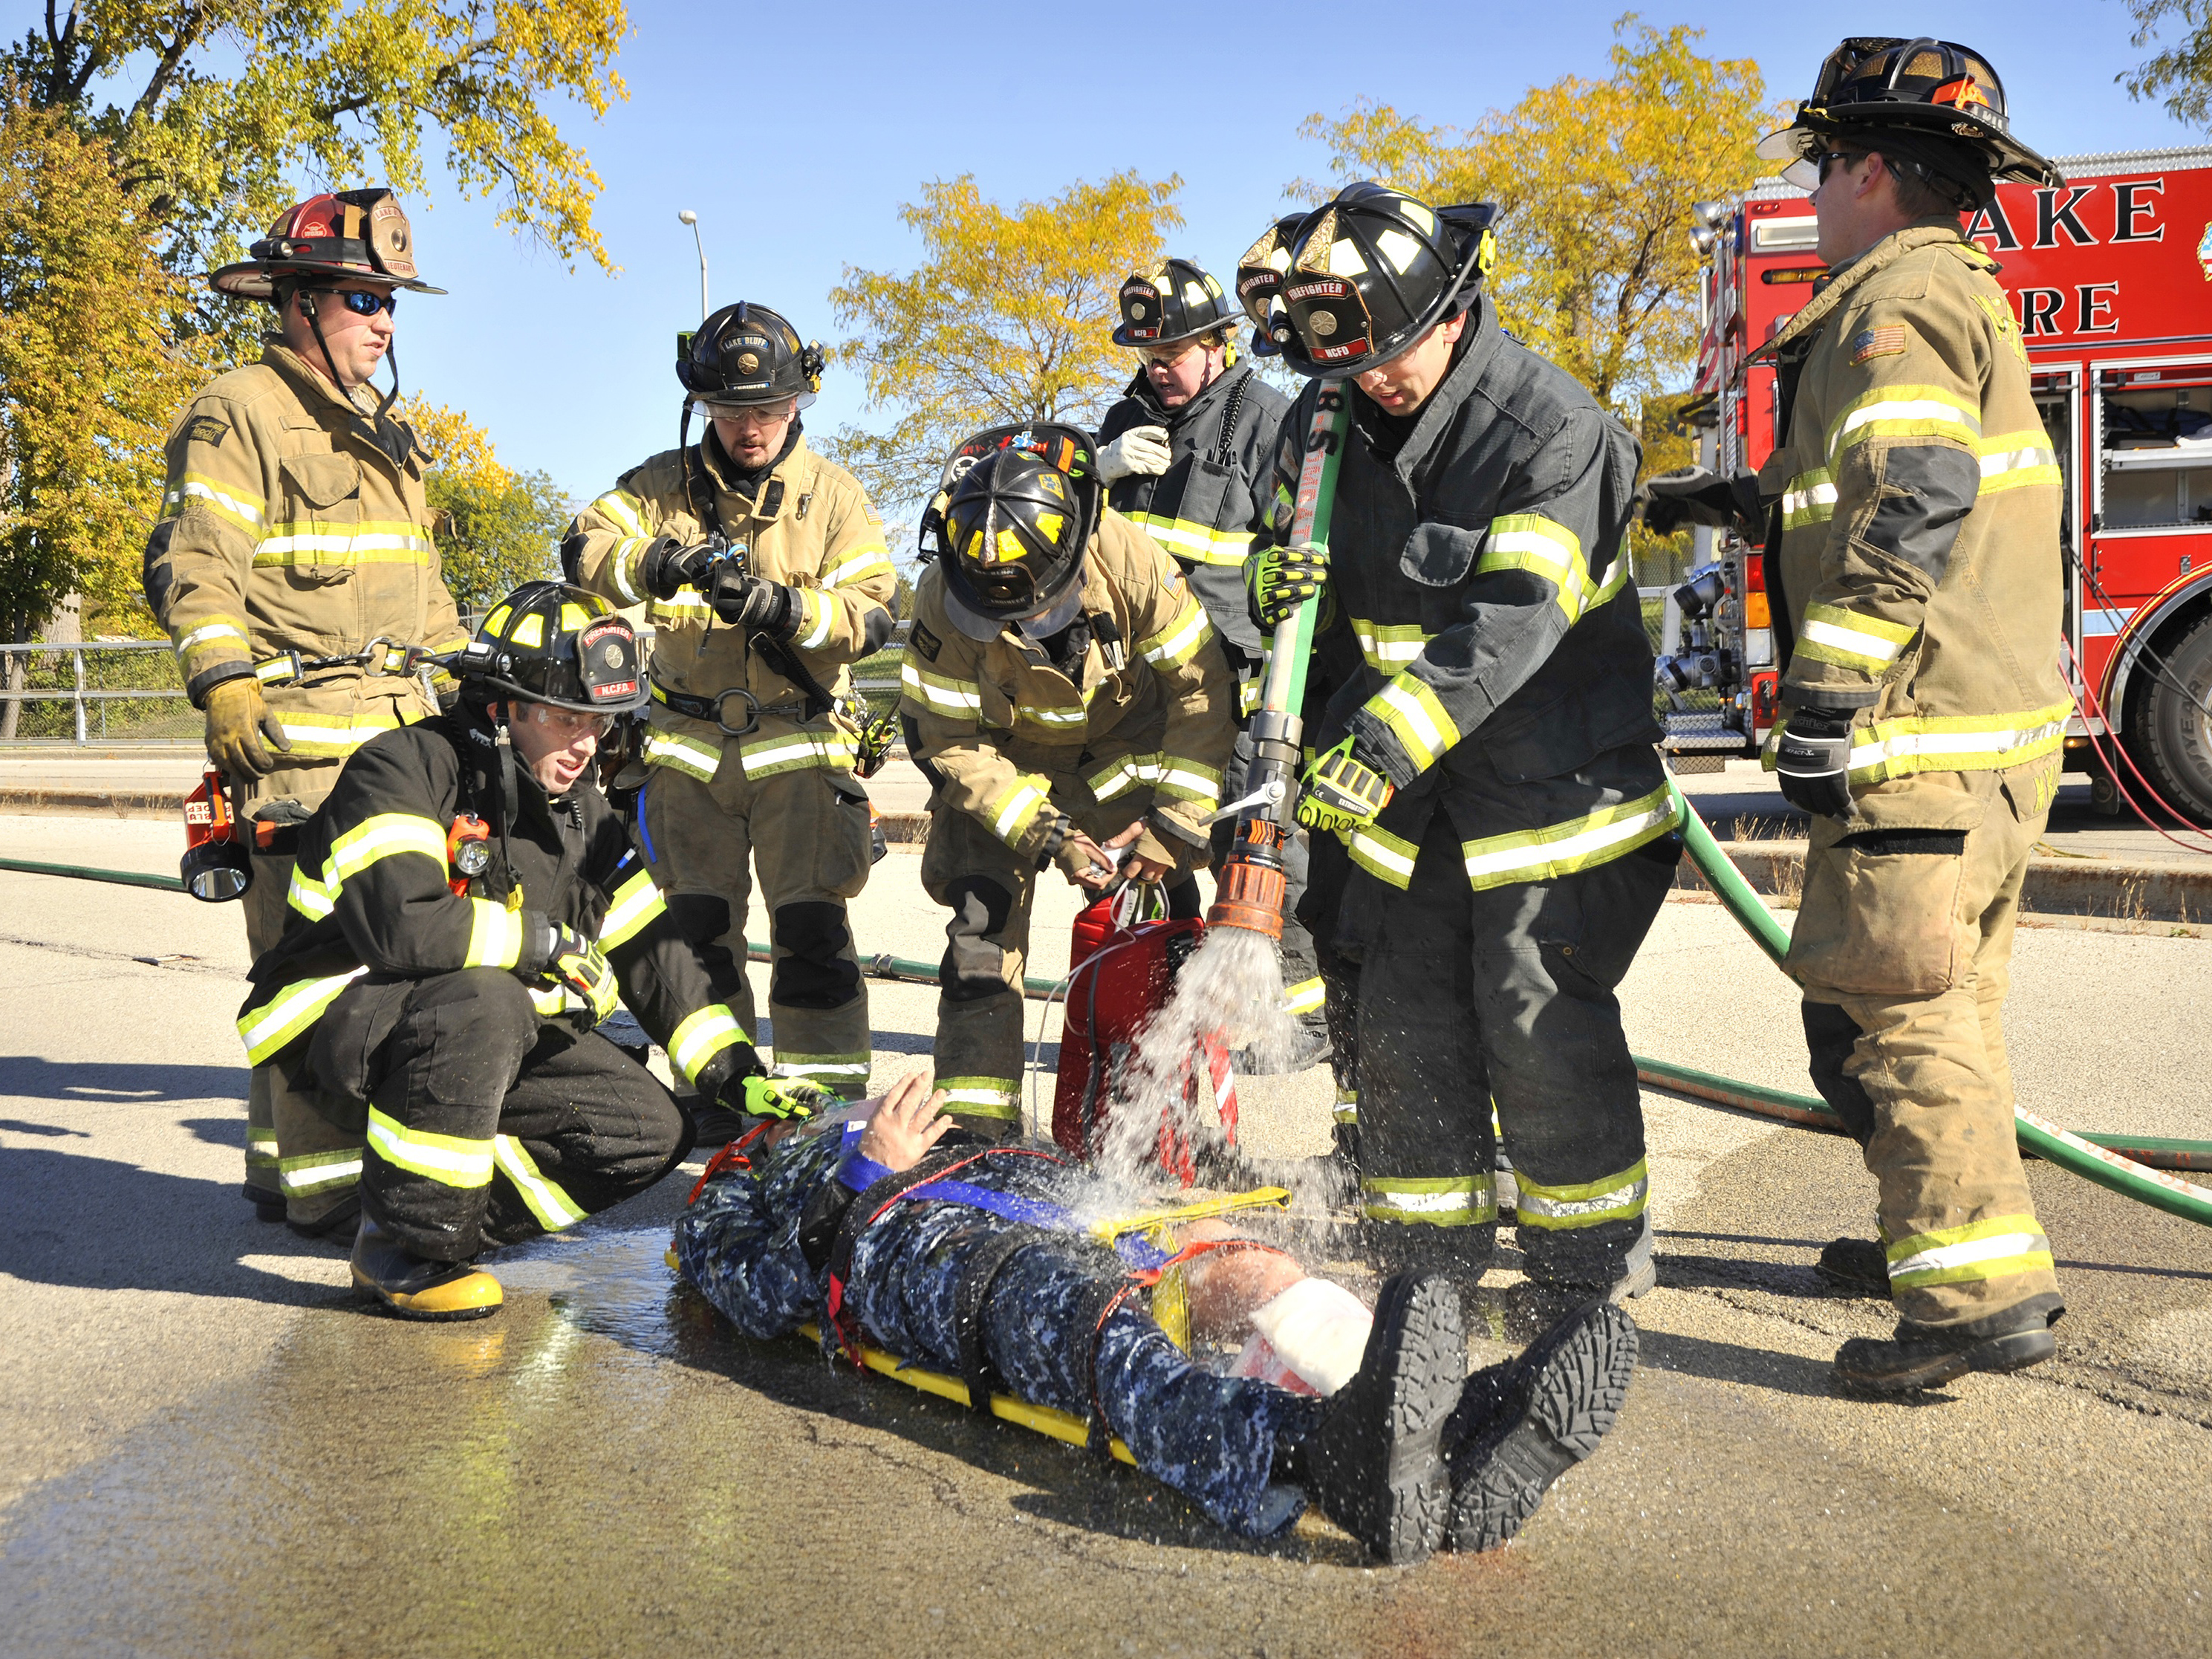 Caesar hosed down during exercise conducted at Naval Station Great Lakes, Ill.